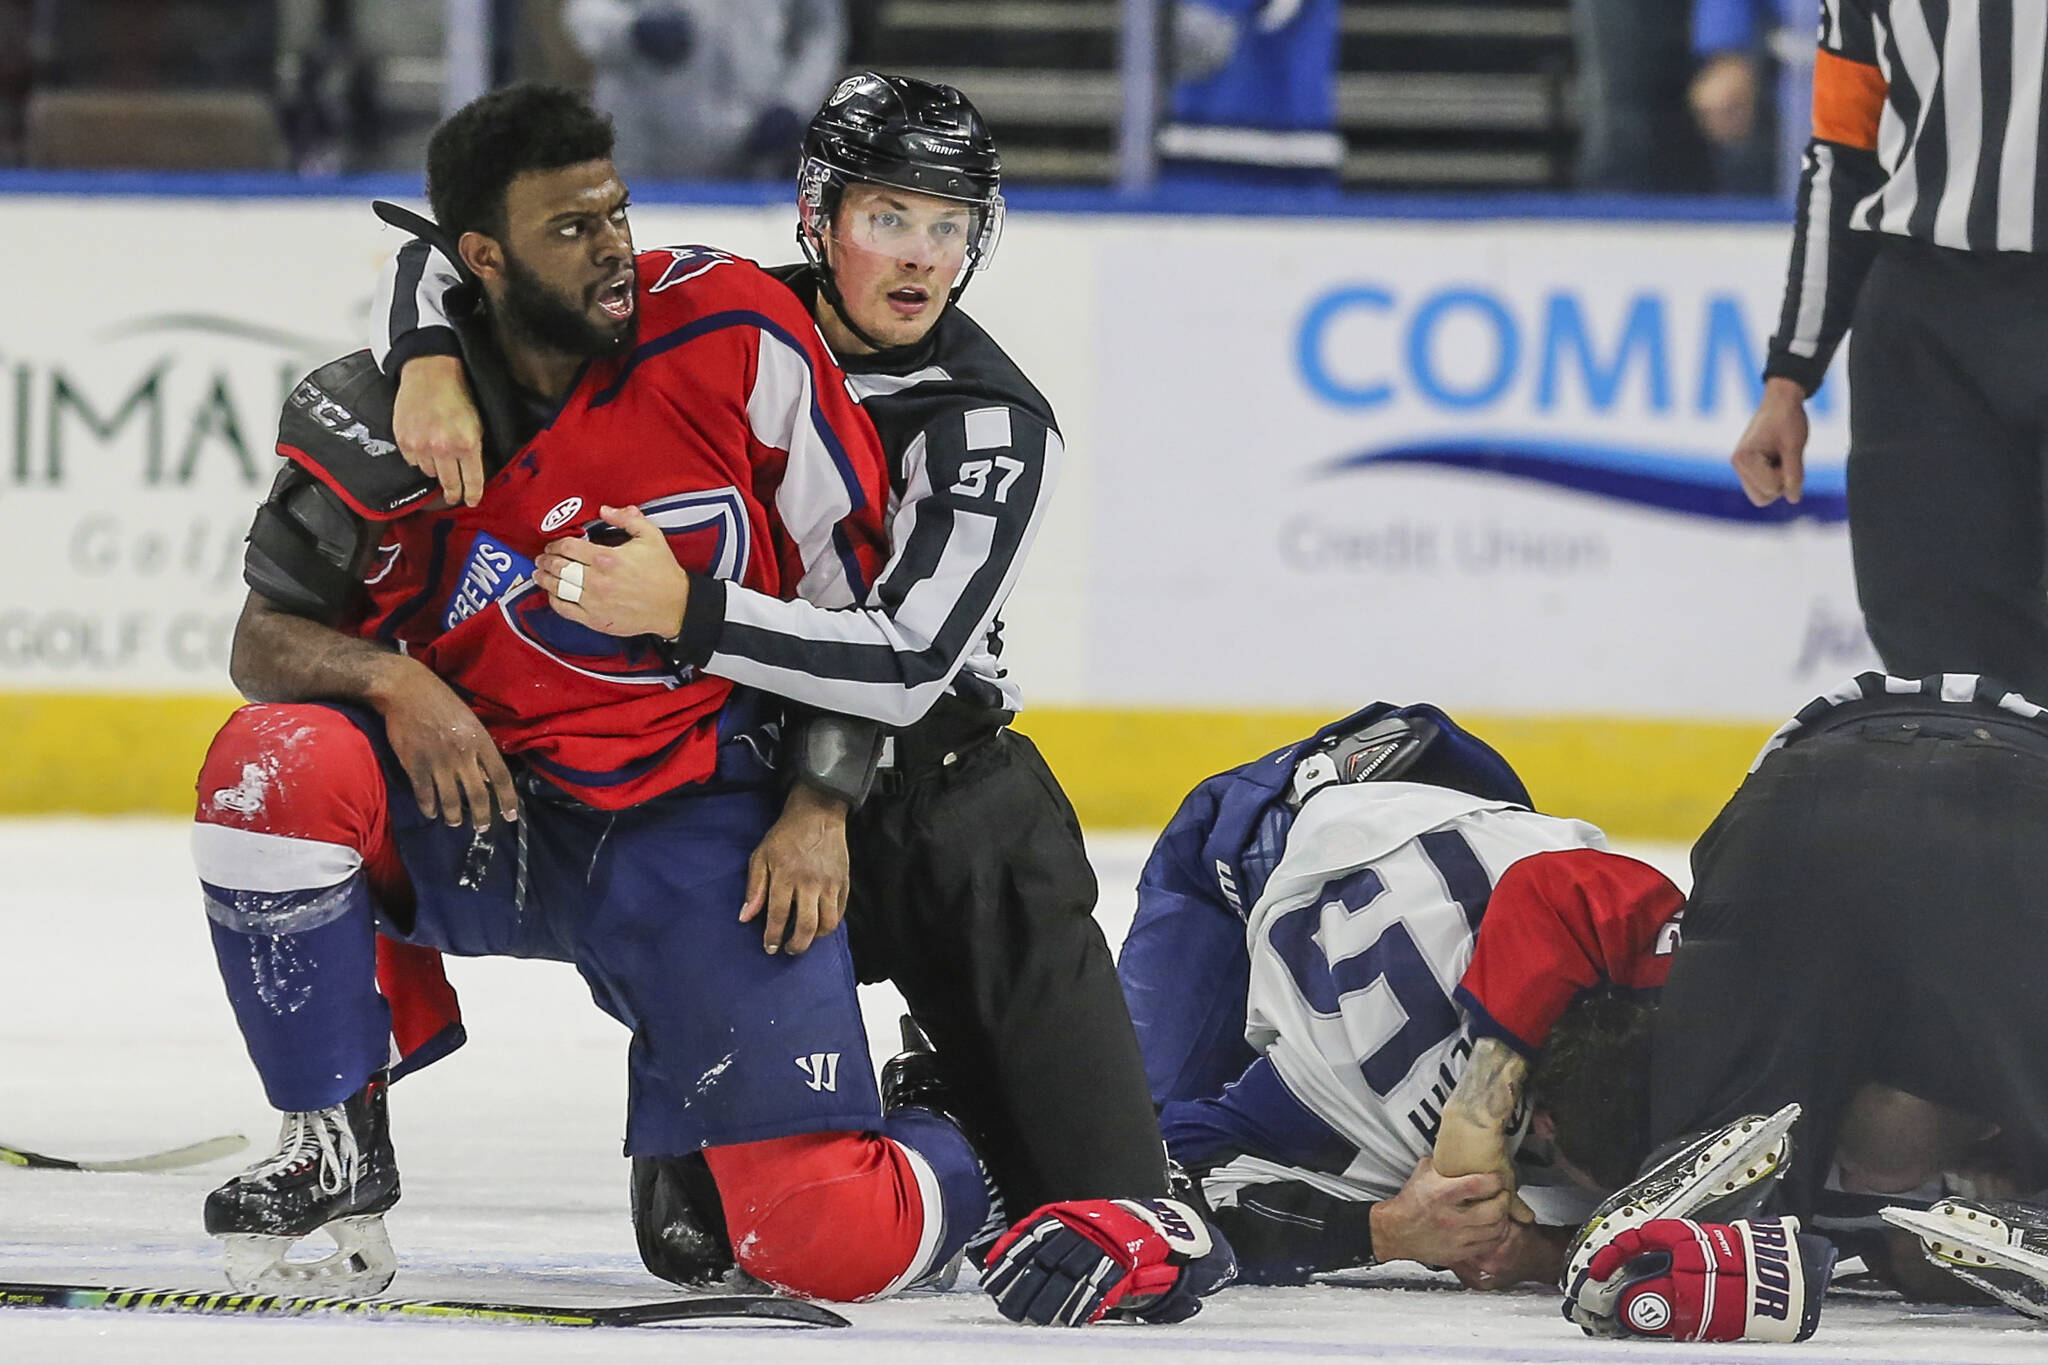 After an on-ice fight, South Carolina Stingrays defenseman Jordan Subban (5), left, is held by linesman Shane Gustafson while Jacksonville Icemen defenseman Jacob Panetta (15) is face-down on the ice engaged with another player during overtime of an ECHL hockey game in Jacksonville, Fla., Saturday, Jan. 22, 2022. The ECHL has suspended Panetta after the brother of longtime NHL defenseman P.K. Subban accused the Jacksonville defenseman of making â€œmonkey gesturesâ€ in his direction. (AP Photo/Gary McCullough)